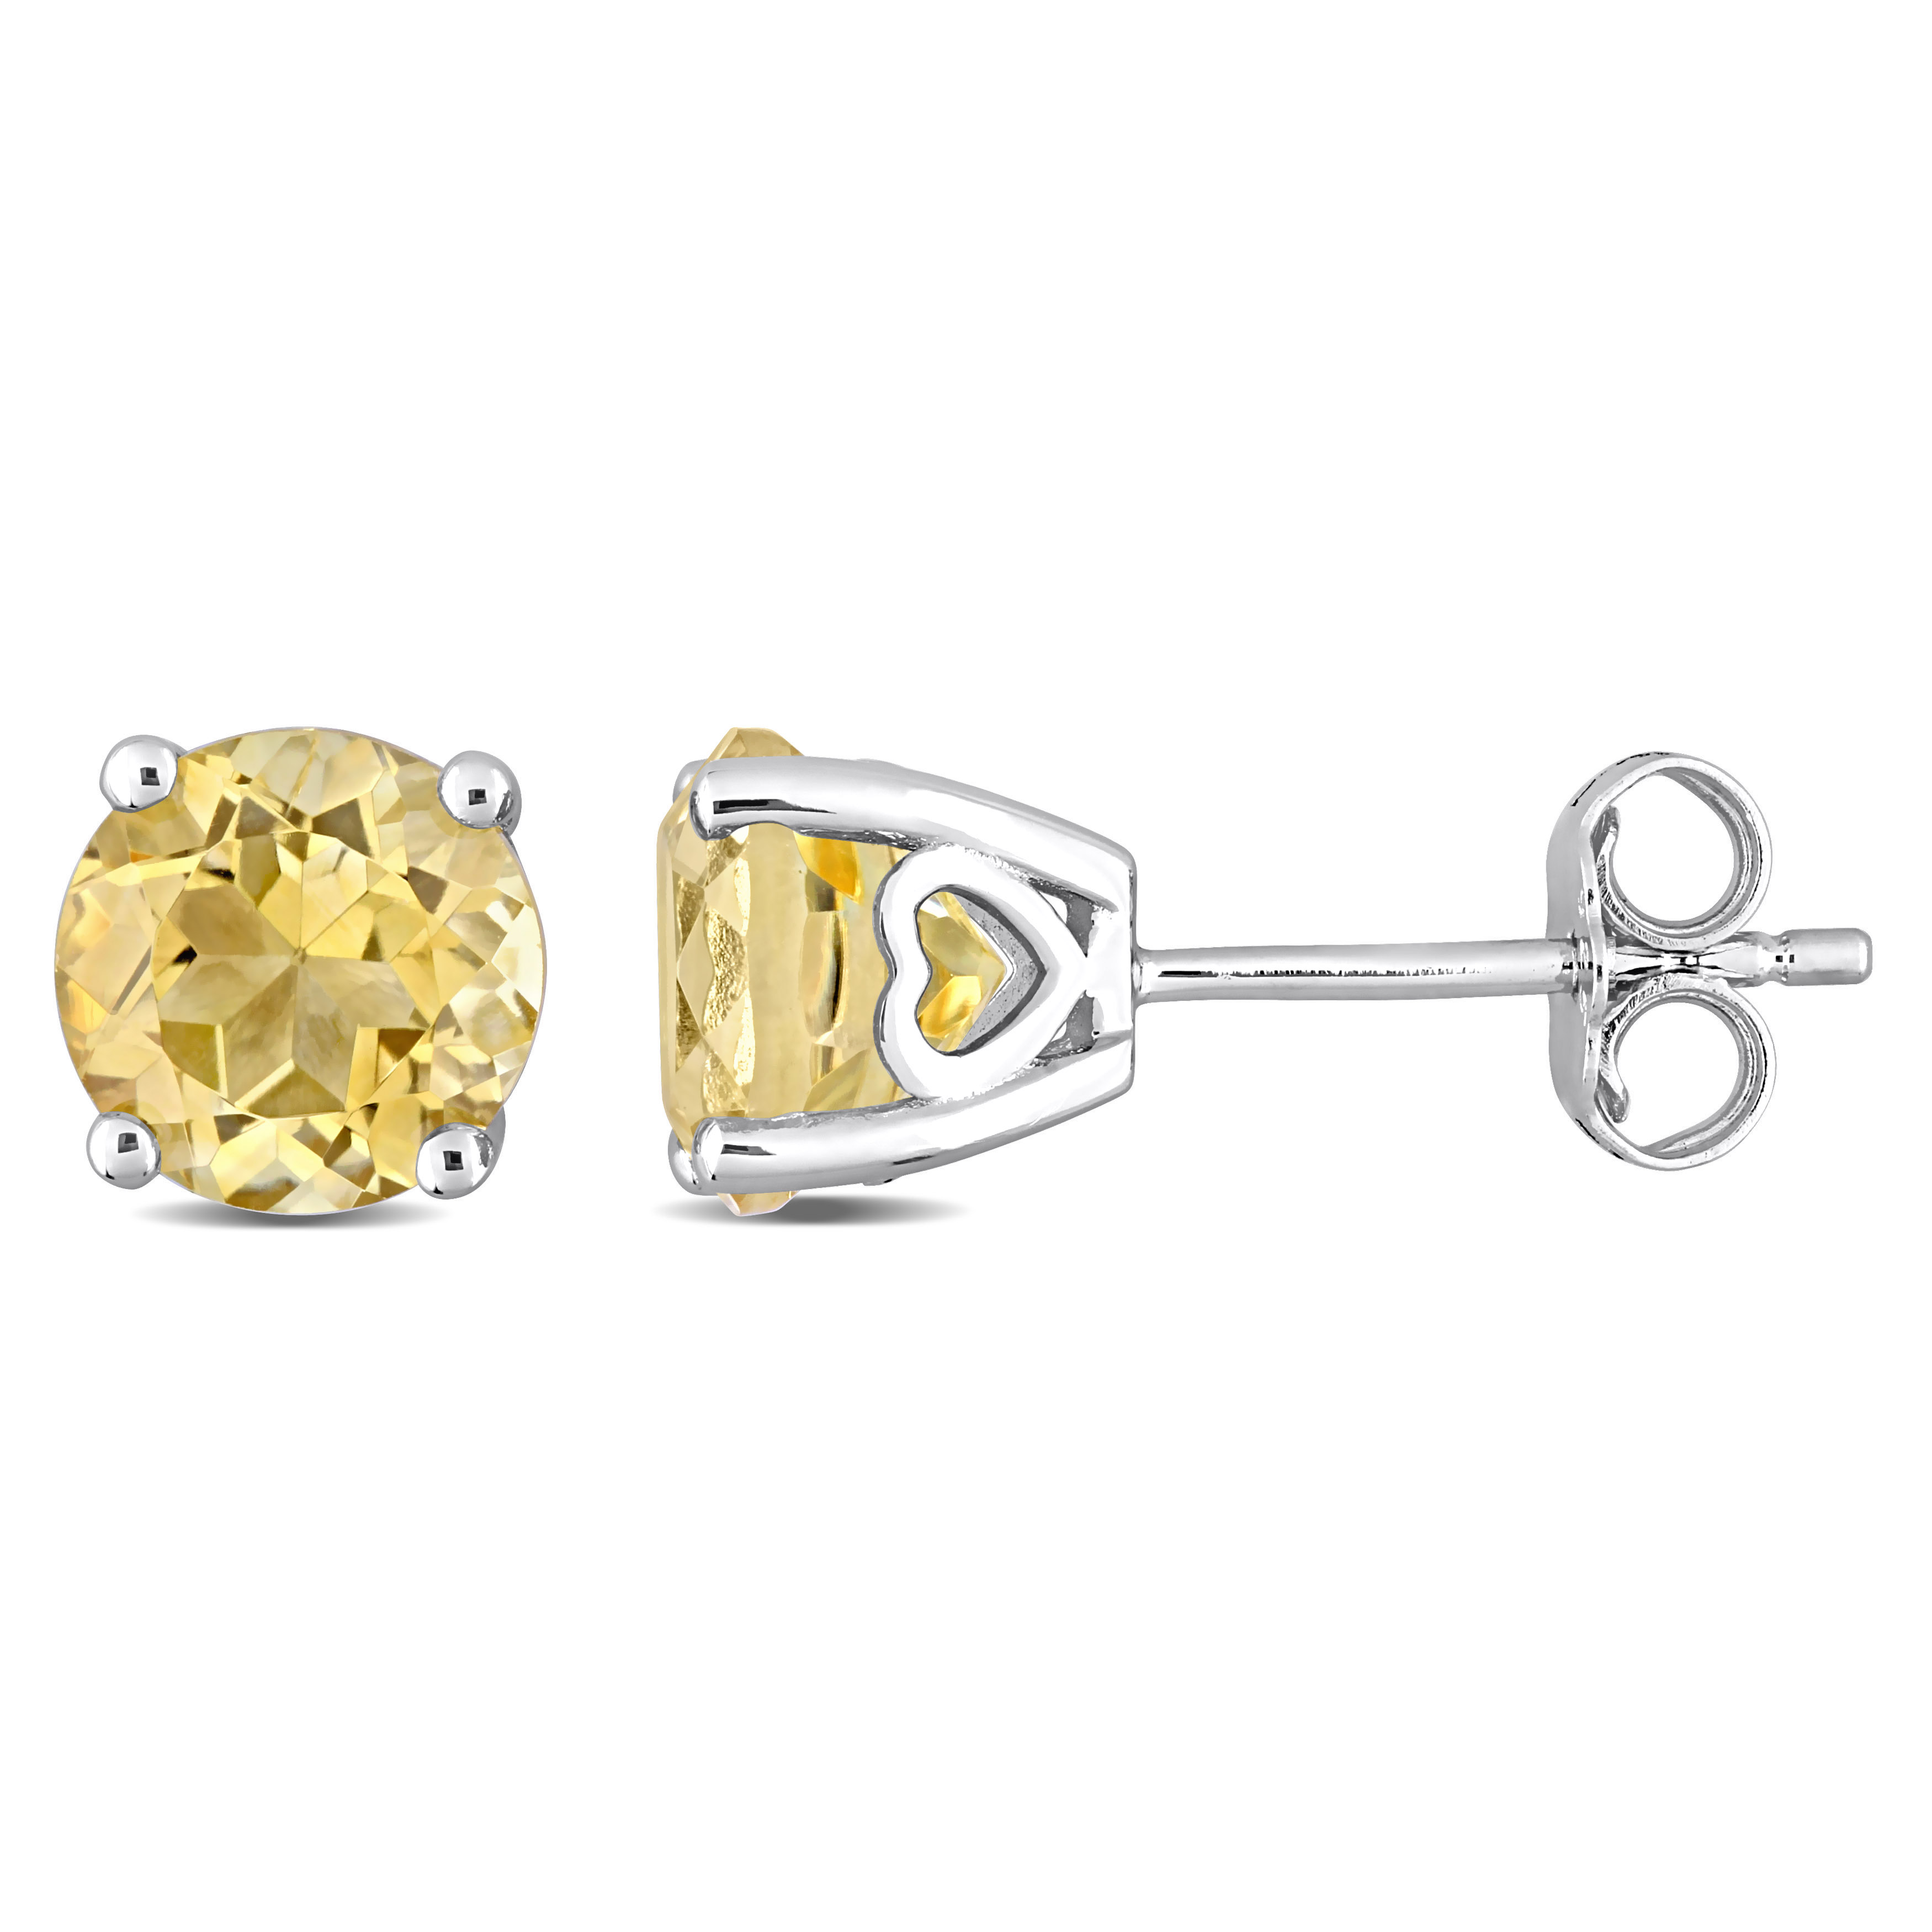 2 1/2 CT TGW Citrine Solitaire Stud Earrings in Sterling Silver